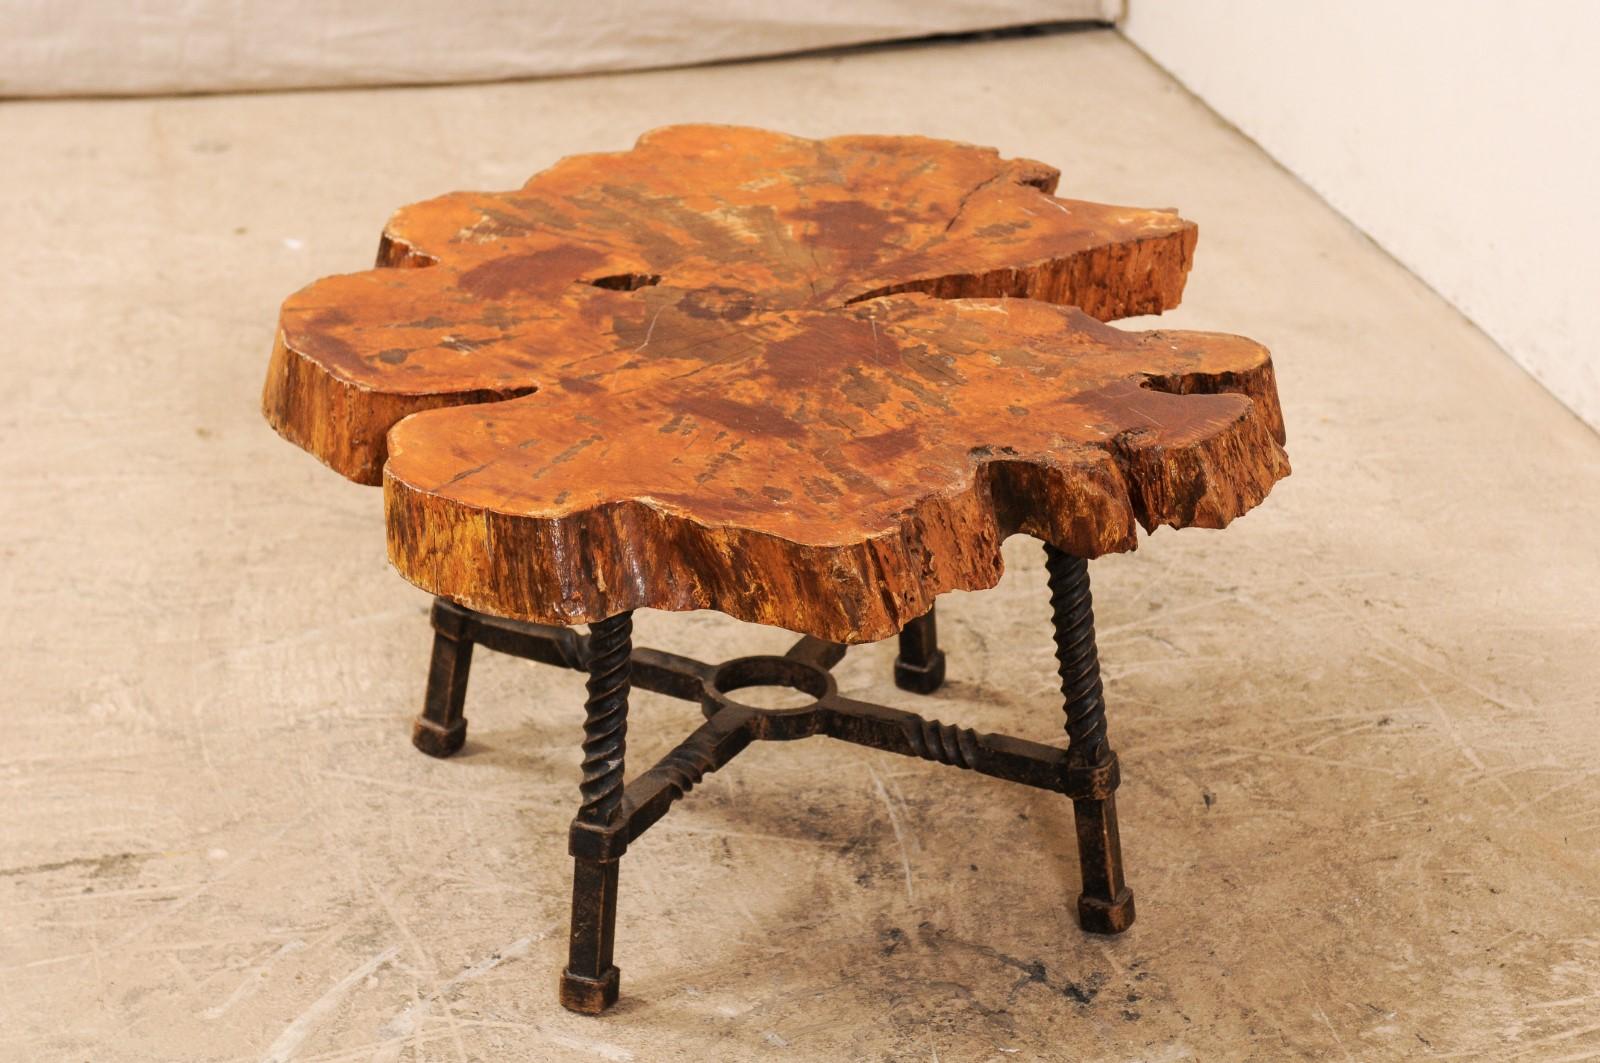 Rustic Early 19th Century Spanish Wood Slab Coffee Table with Hand Forged Iron Base